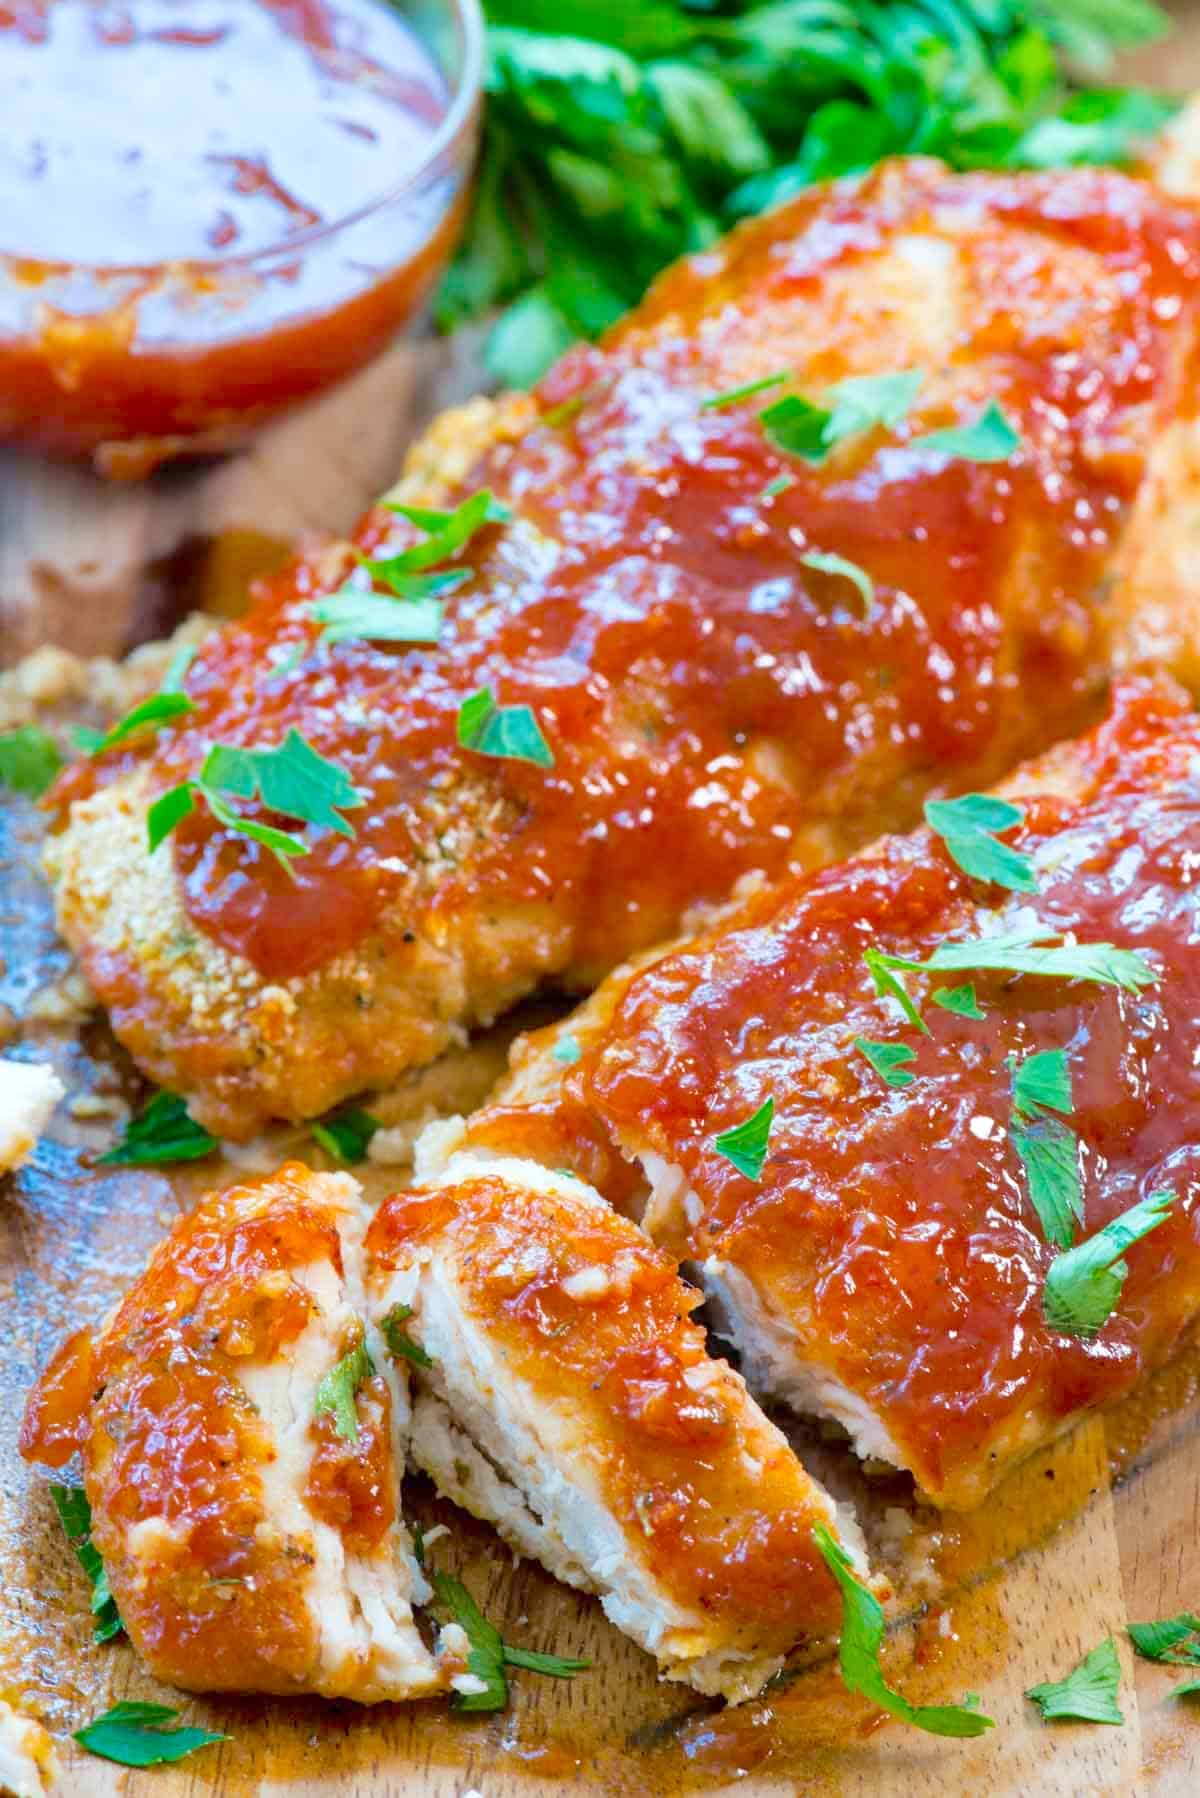 sliced chicken on a cutting board with red sauce and garnish on top.